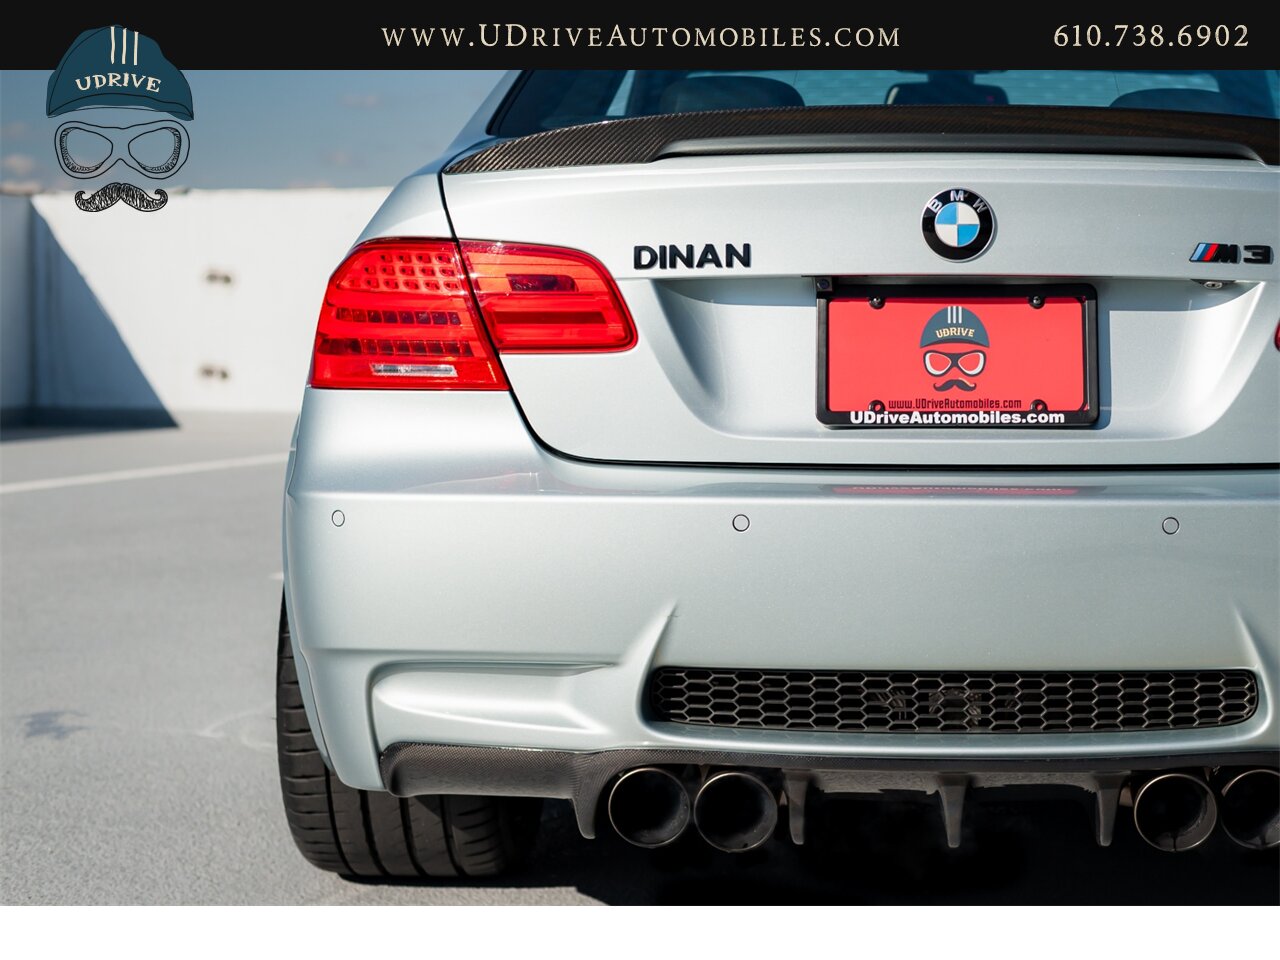 2008 BMW M3 Dinan S3-R M3 1 of 36 Produced DCT  1 Owner Full Service History 4.6L Stroker V8 - Photo 22 - West Chester, PA 19382